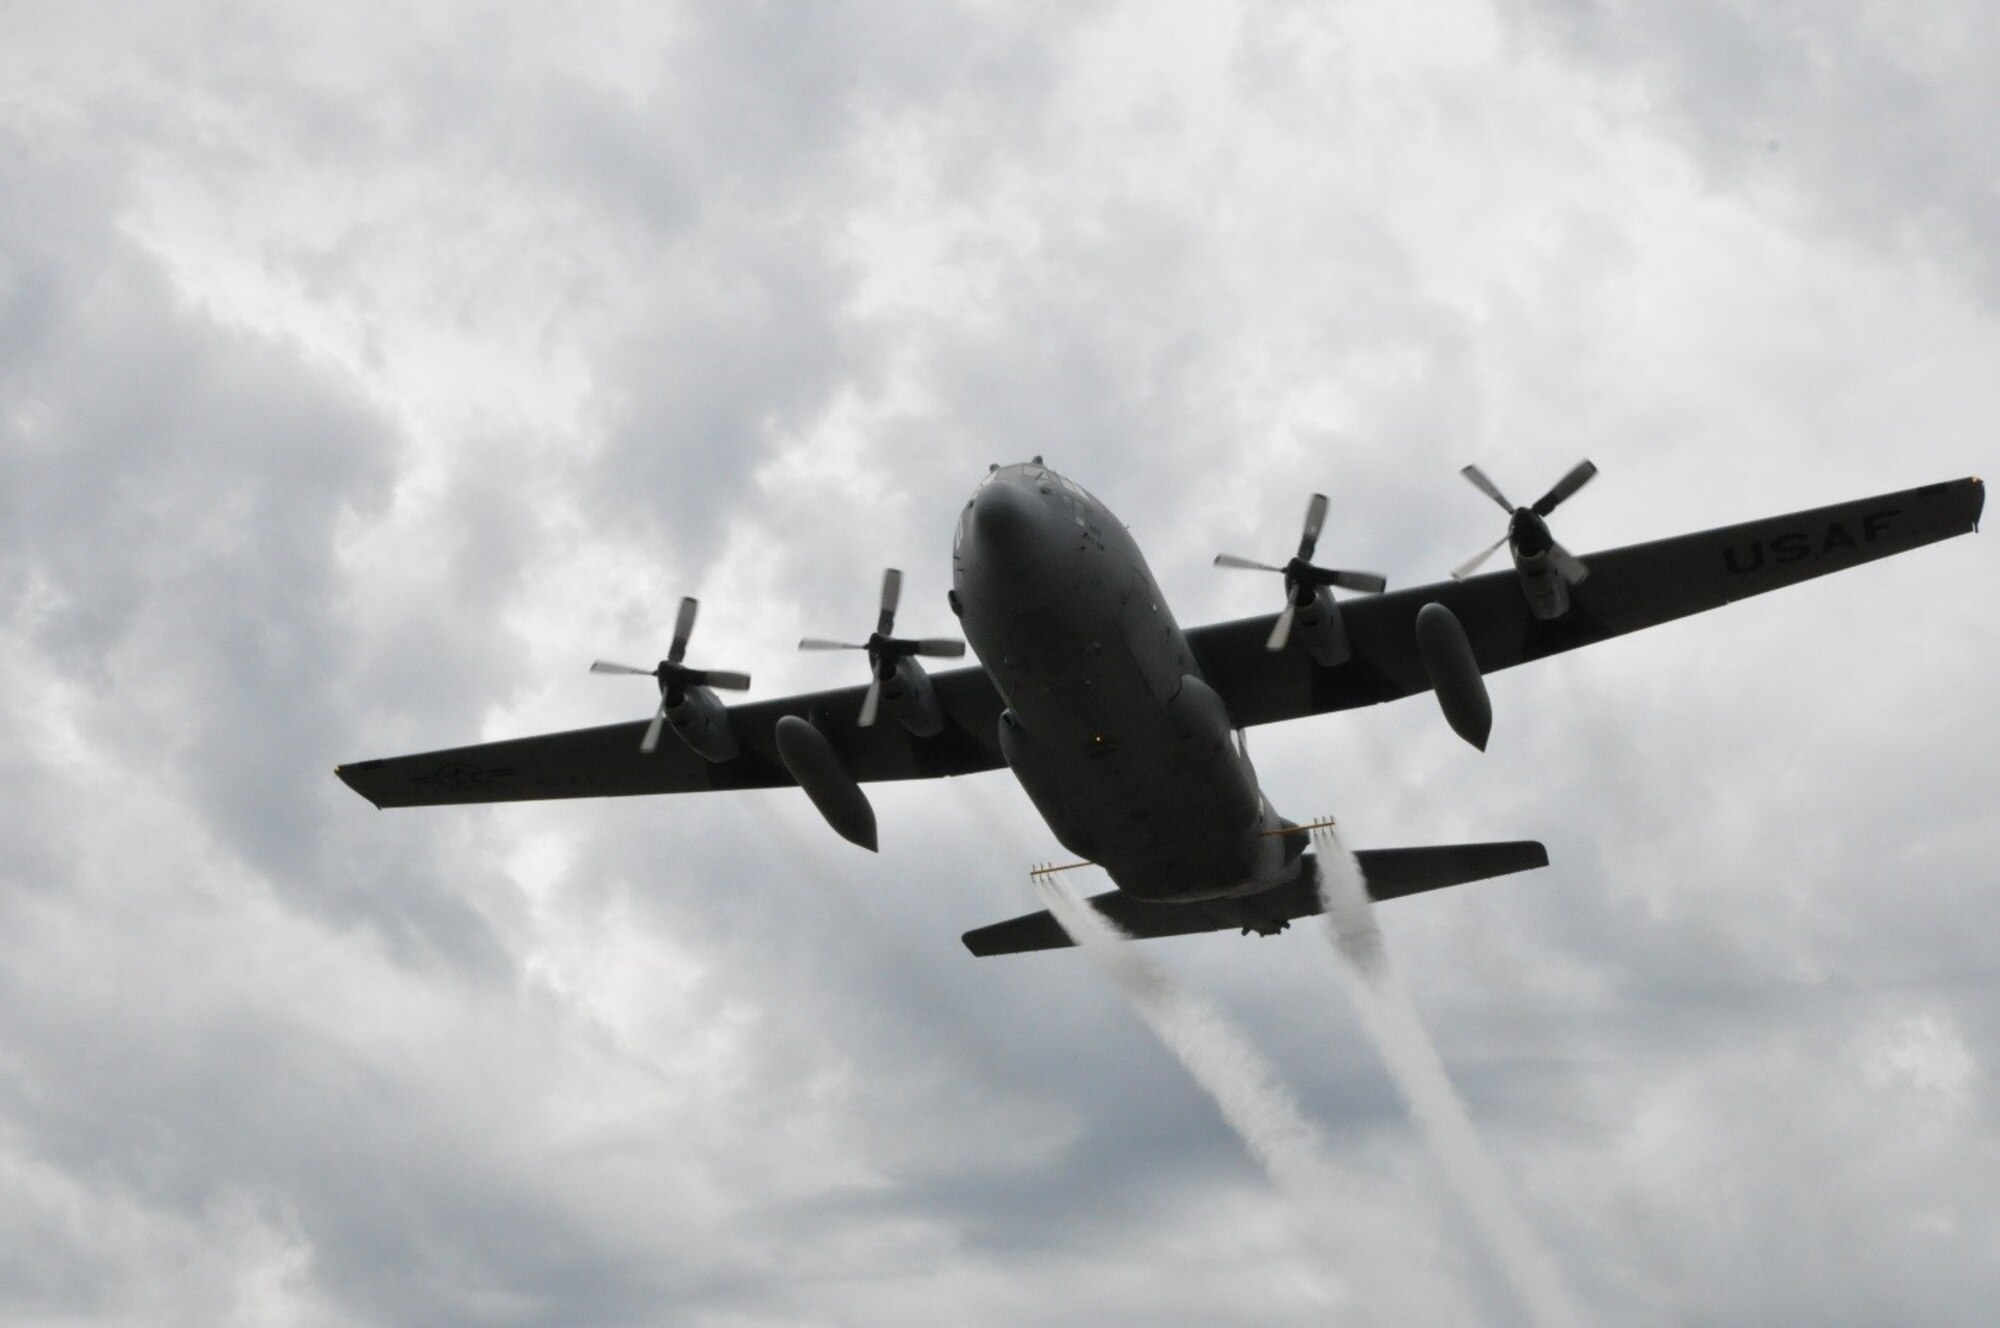 A modified U.S. C-130 aircraft, assigned to the 910th Airlift Wing, sprays water simulating a pesticide solution during a field exercise as part of the Department of Defense Aerial Spray Certification Course, Jan. 13, 2016.